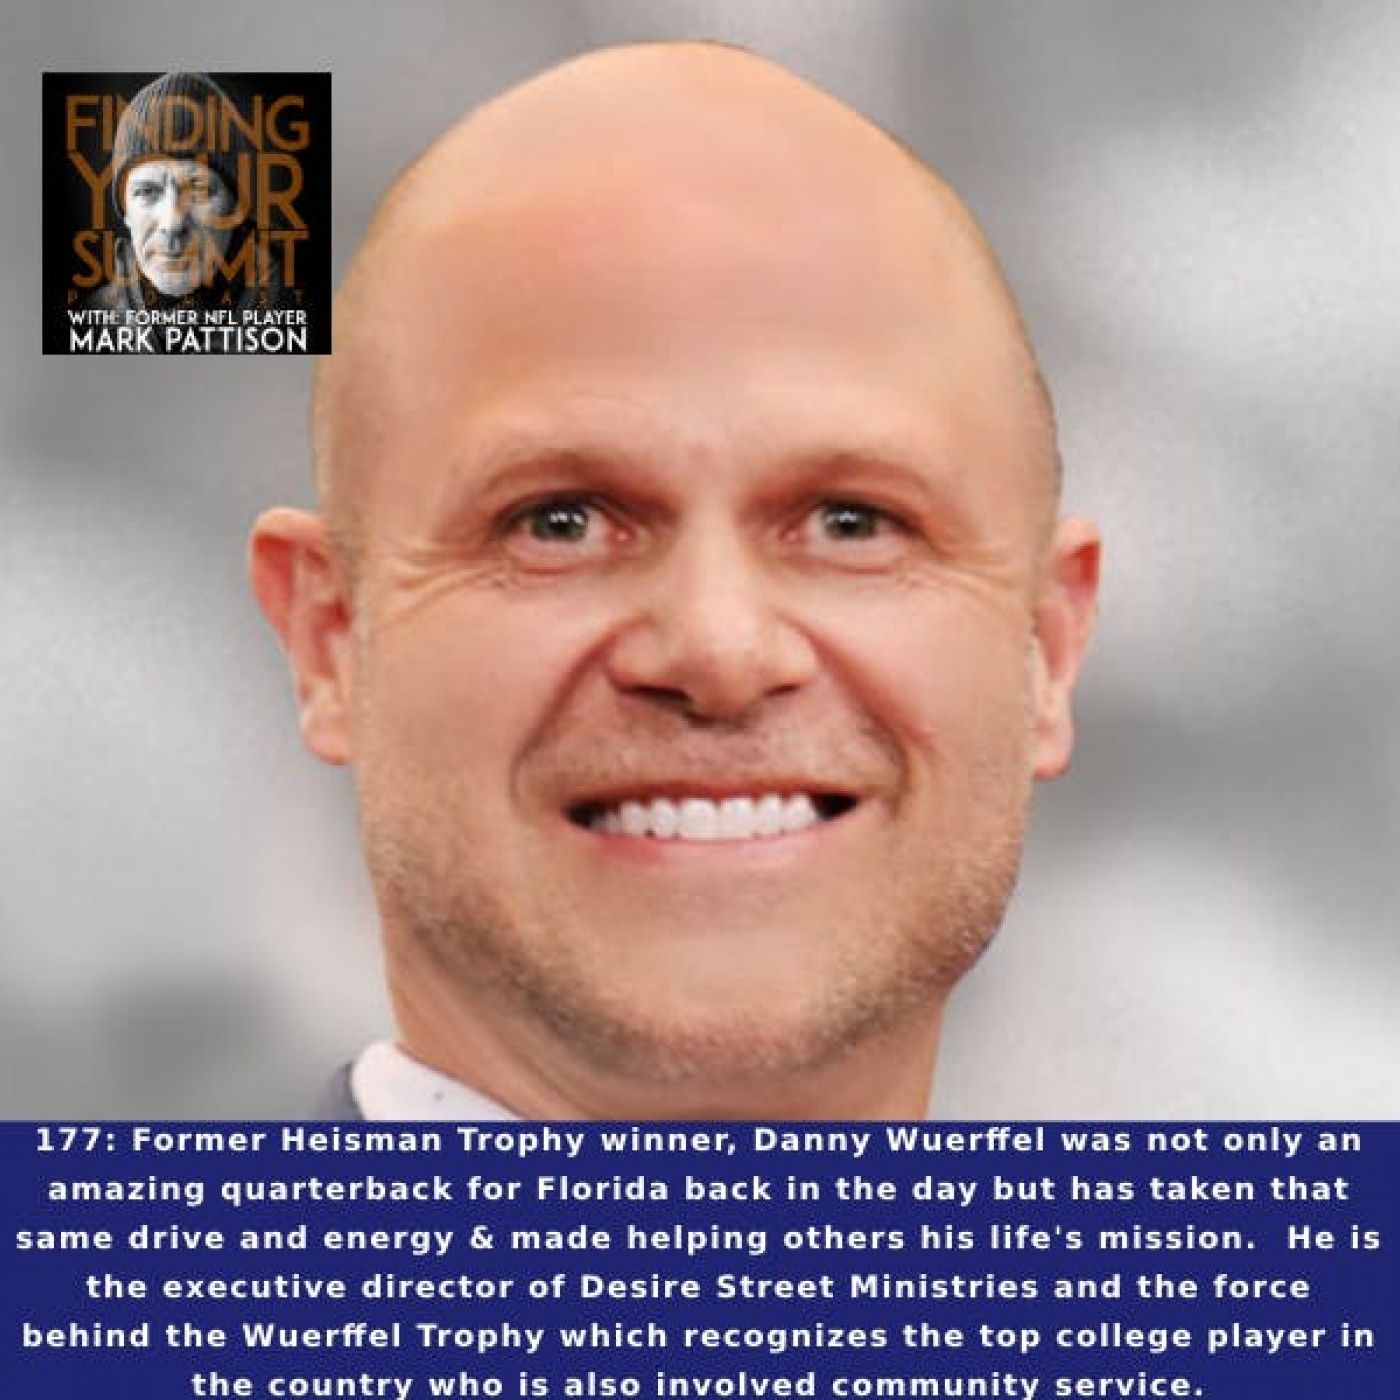 Former Heisman Trophy winner, Danny Wuerffel was not only an amazing quarterback for Florida back in the day but has taken that same drive a